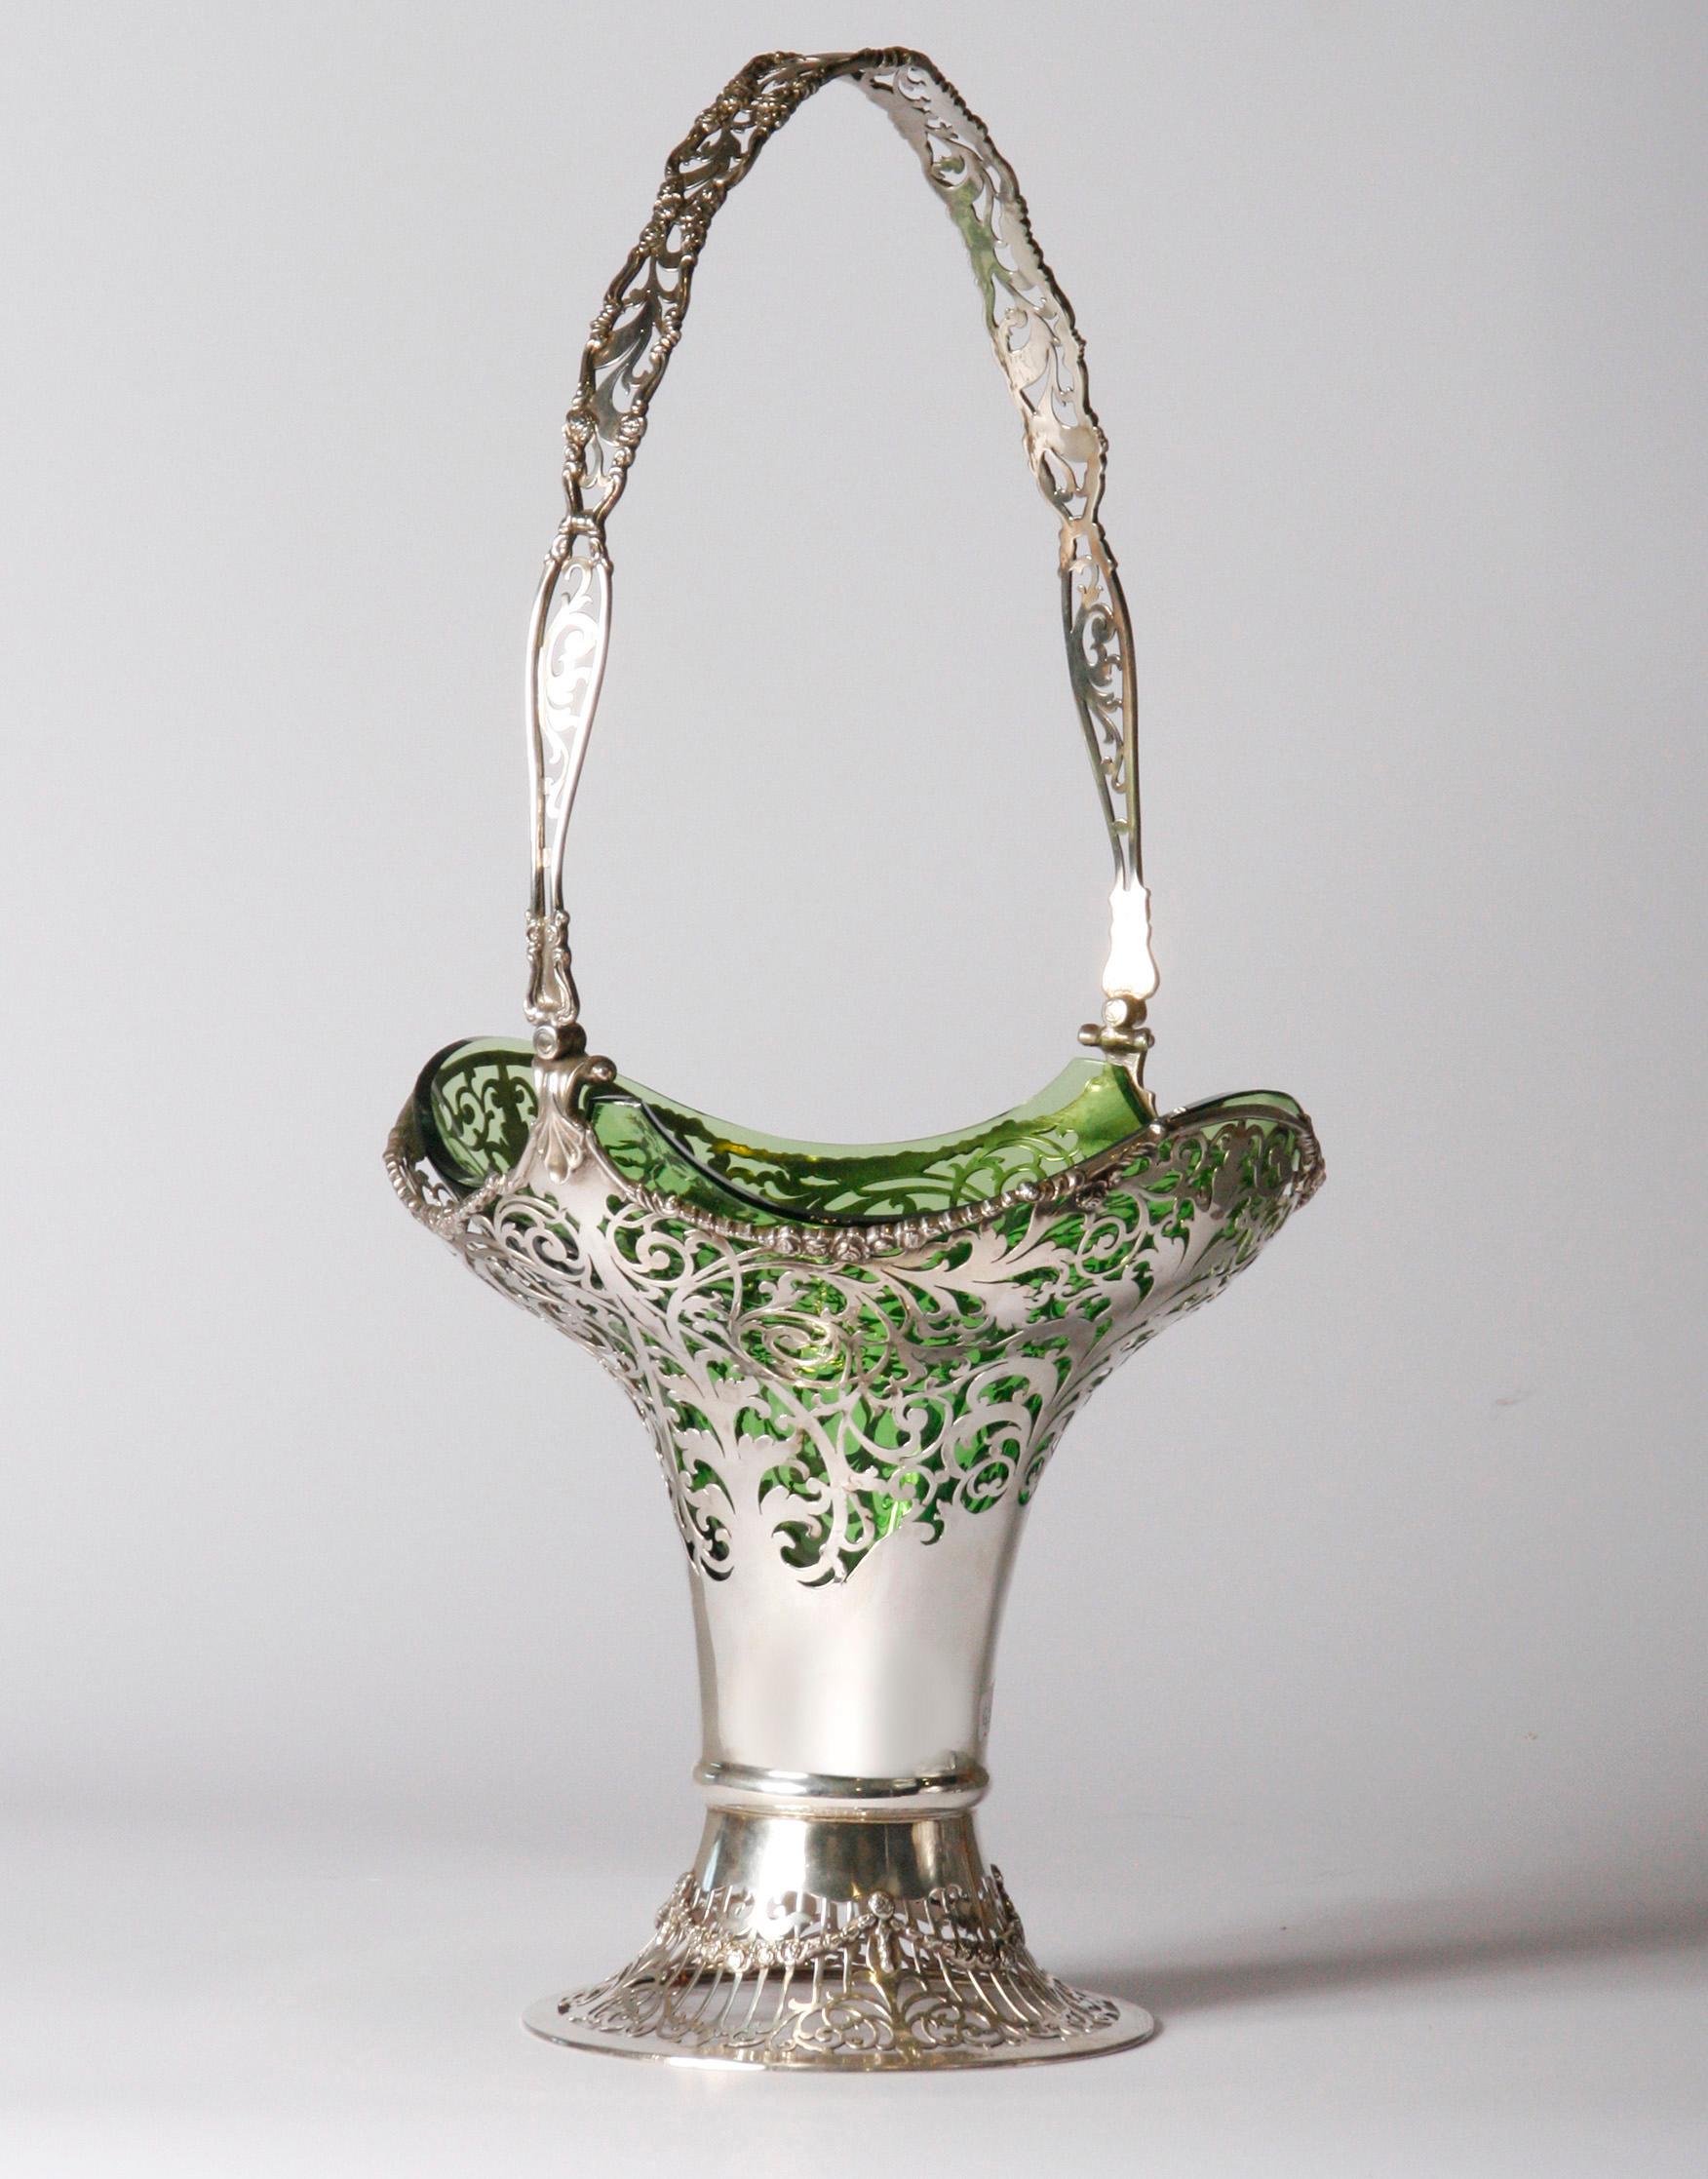 Beautiful and large silver flower basket.
The vase is made by Mappin & Webb London. The silver has been richly worked and ajour sawn. The glass interior is original and made from green handmade glass. This is still completely intact.
The silver is